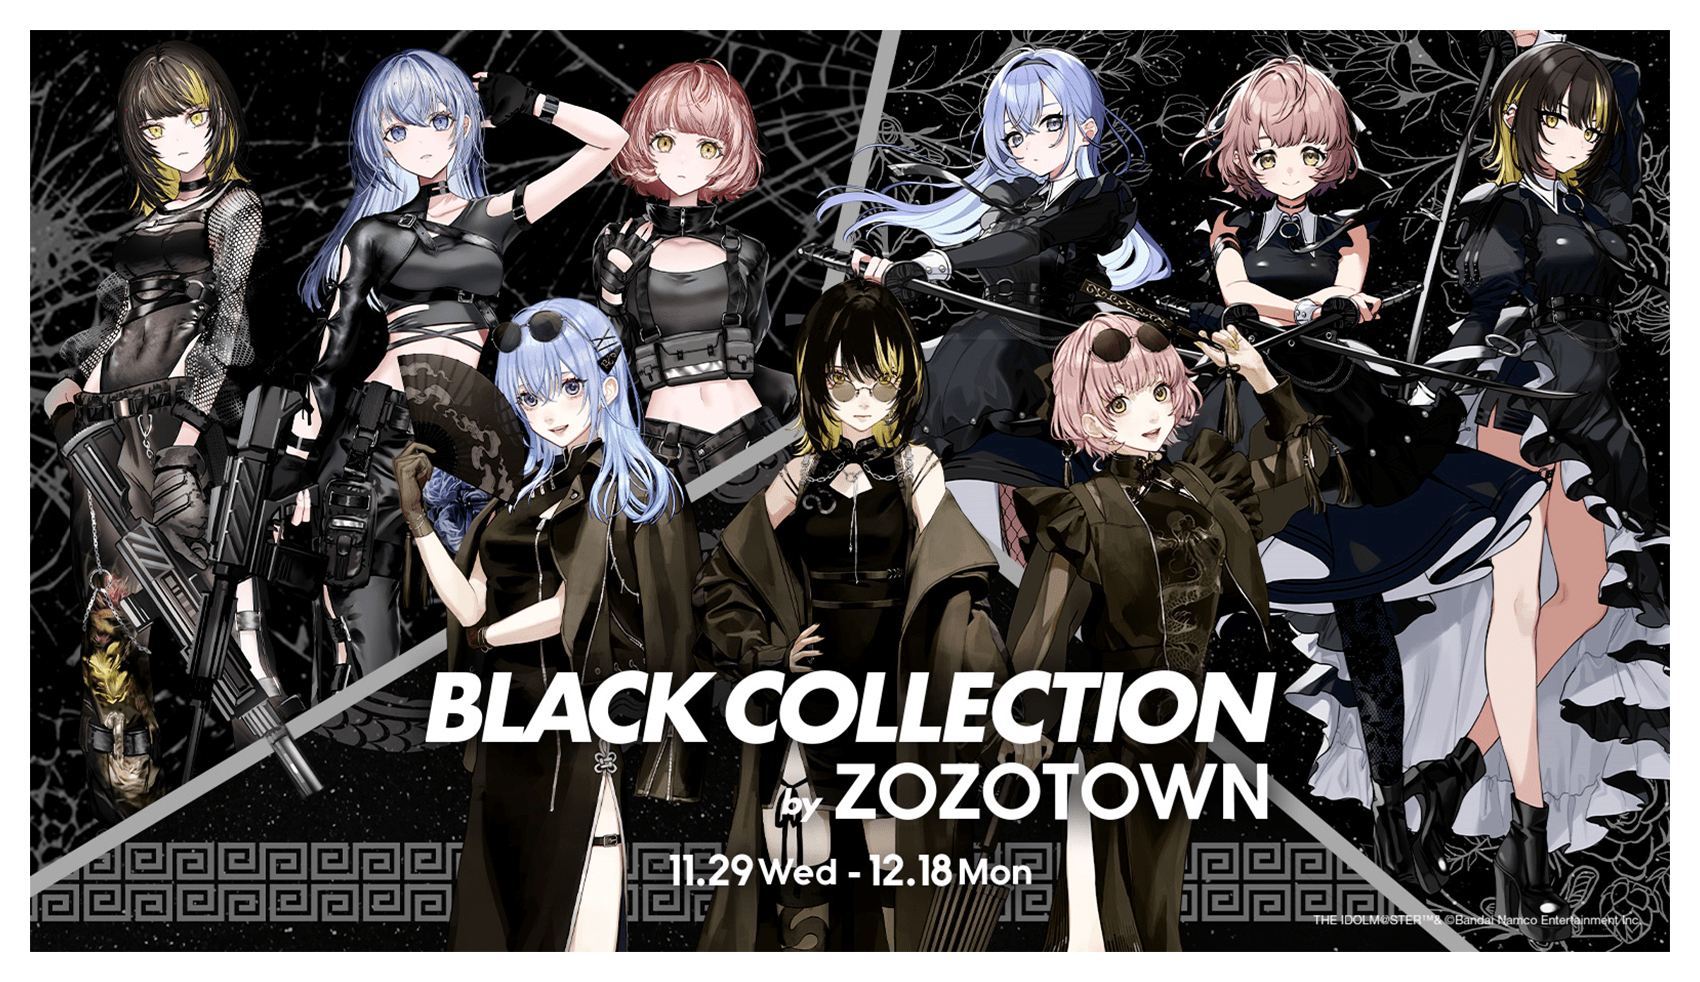 BLACK COLLECTION by ZOZOTOWN 11.29 Wed - 12.18 Mon